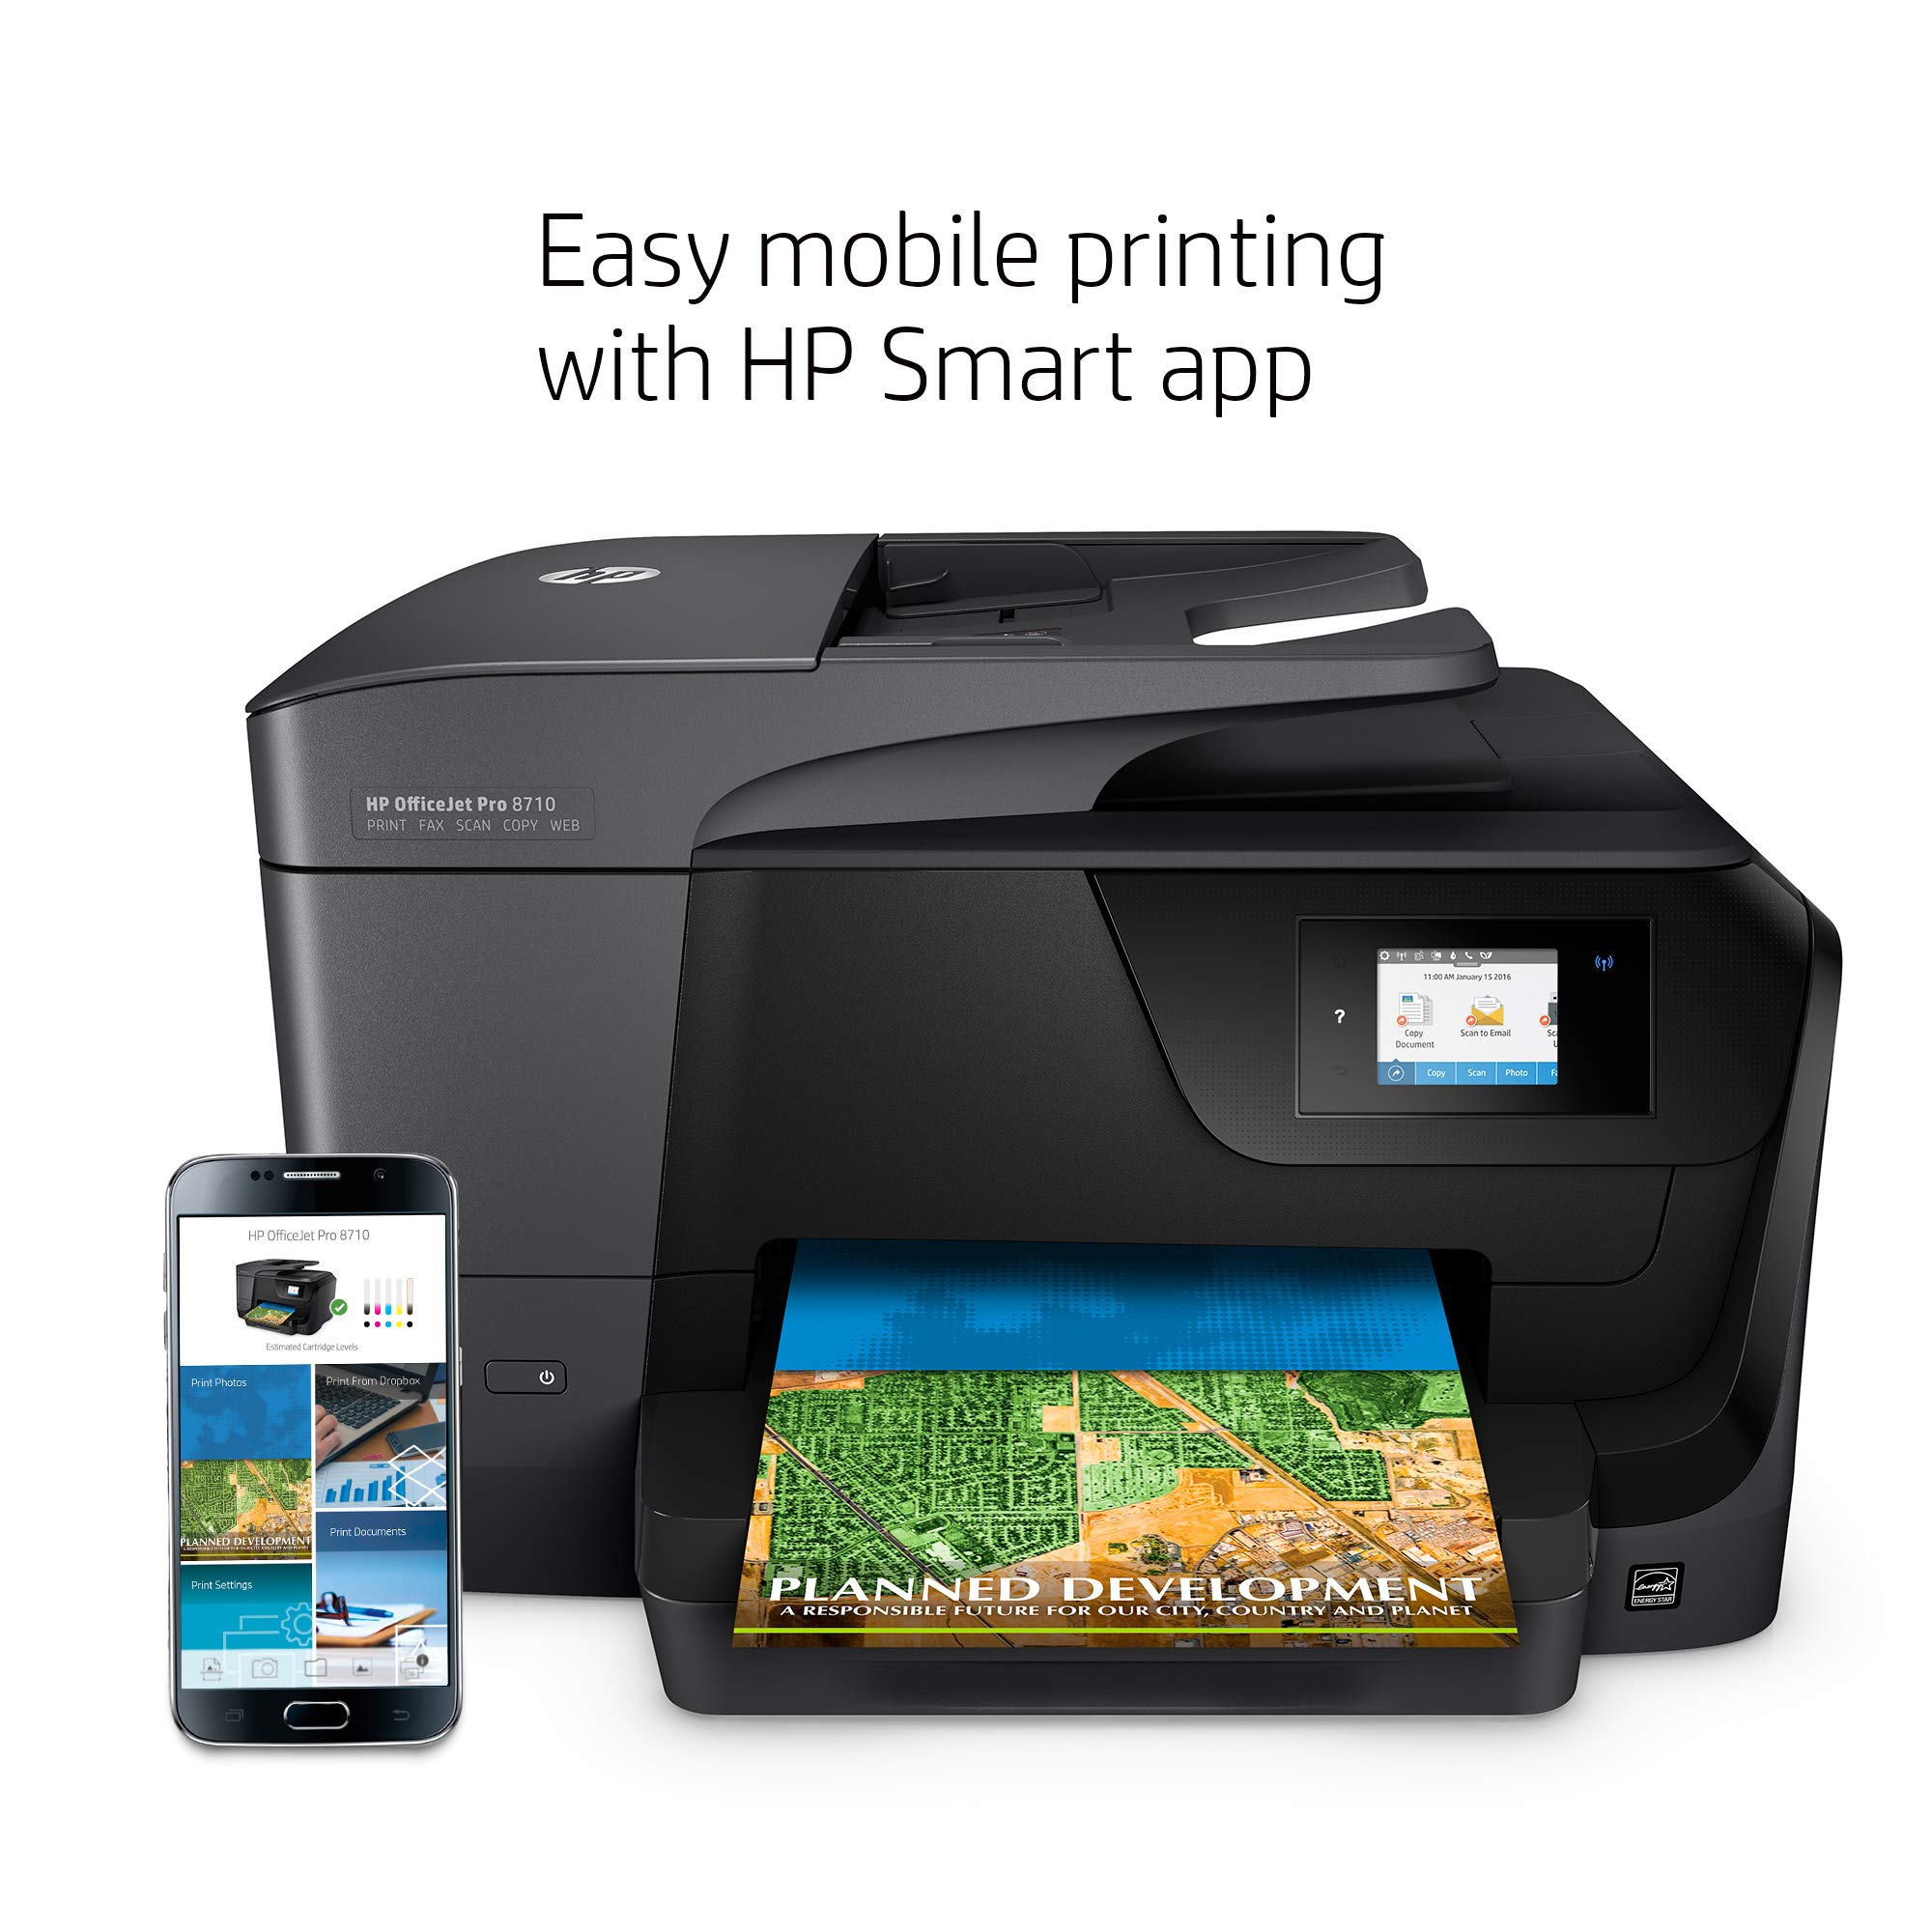 HP OfficeJet Pro 8710 All-in-One Wireless Printer with Mobile Printing, Instant Ink ready (M9L66A)